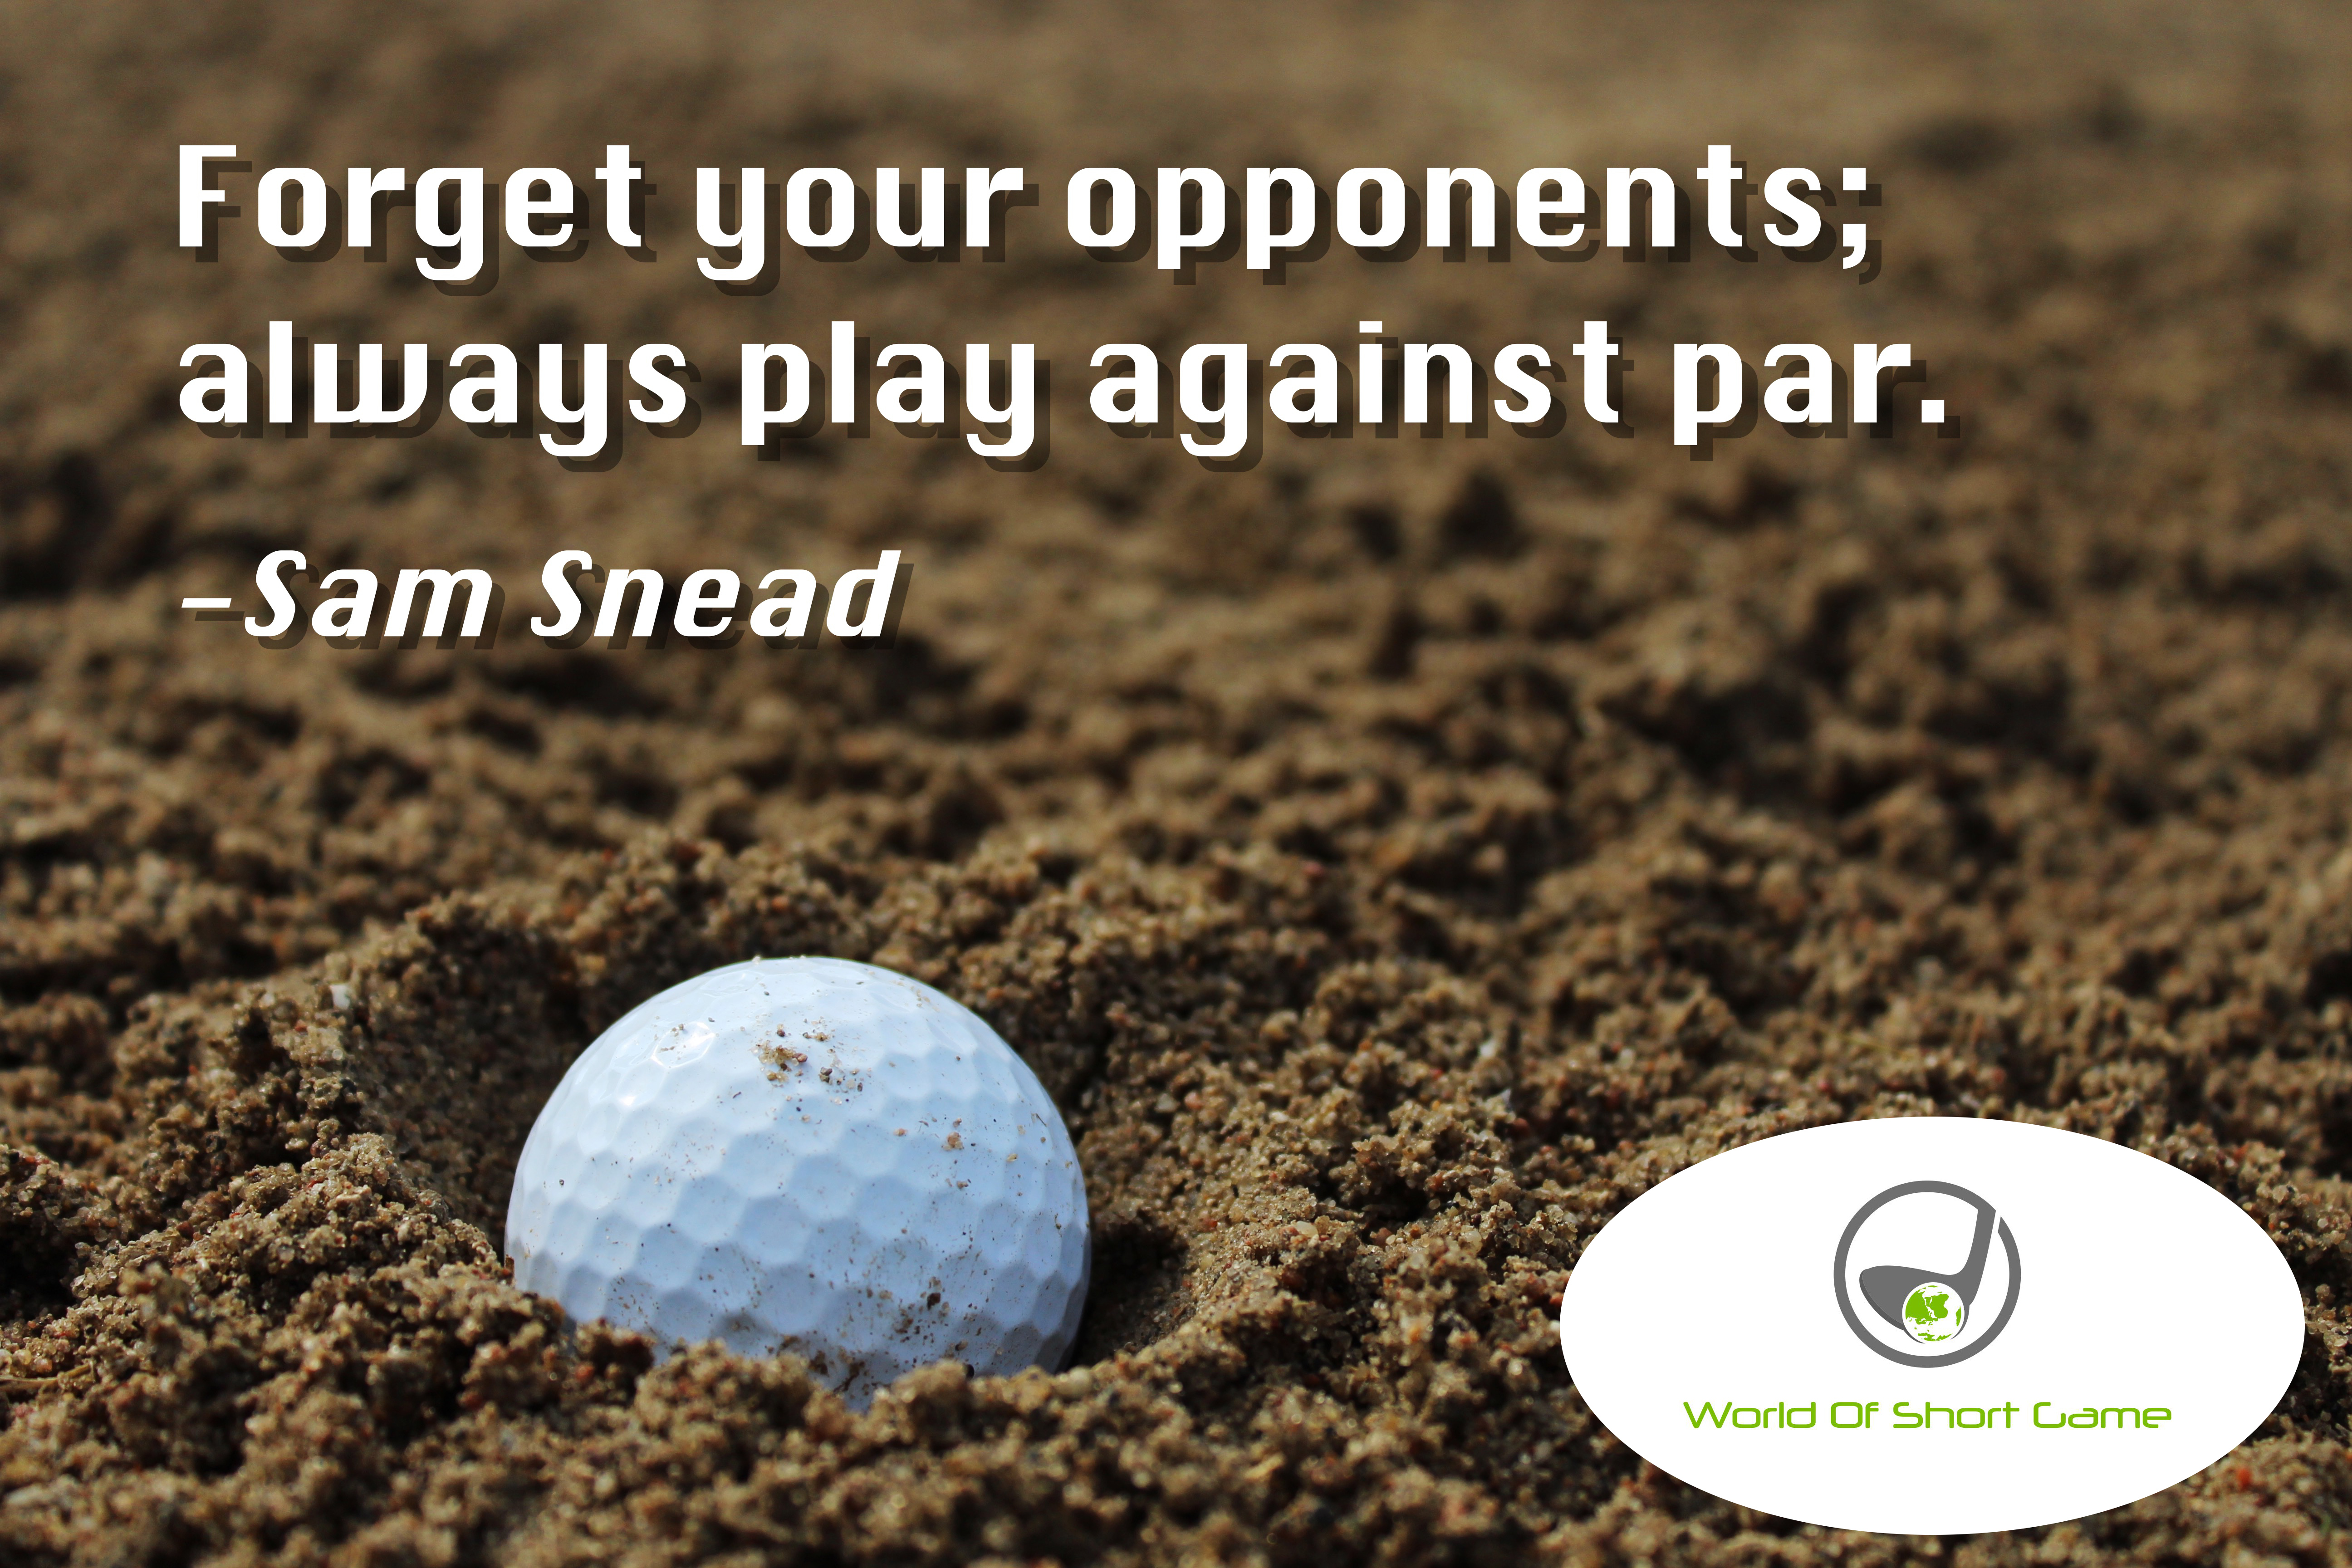 Golf Quotes - World Of Short Game